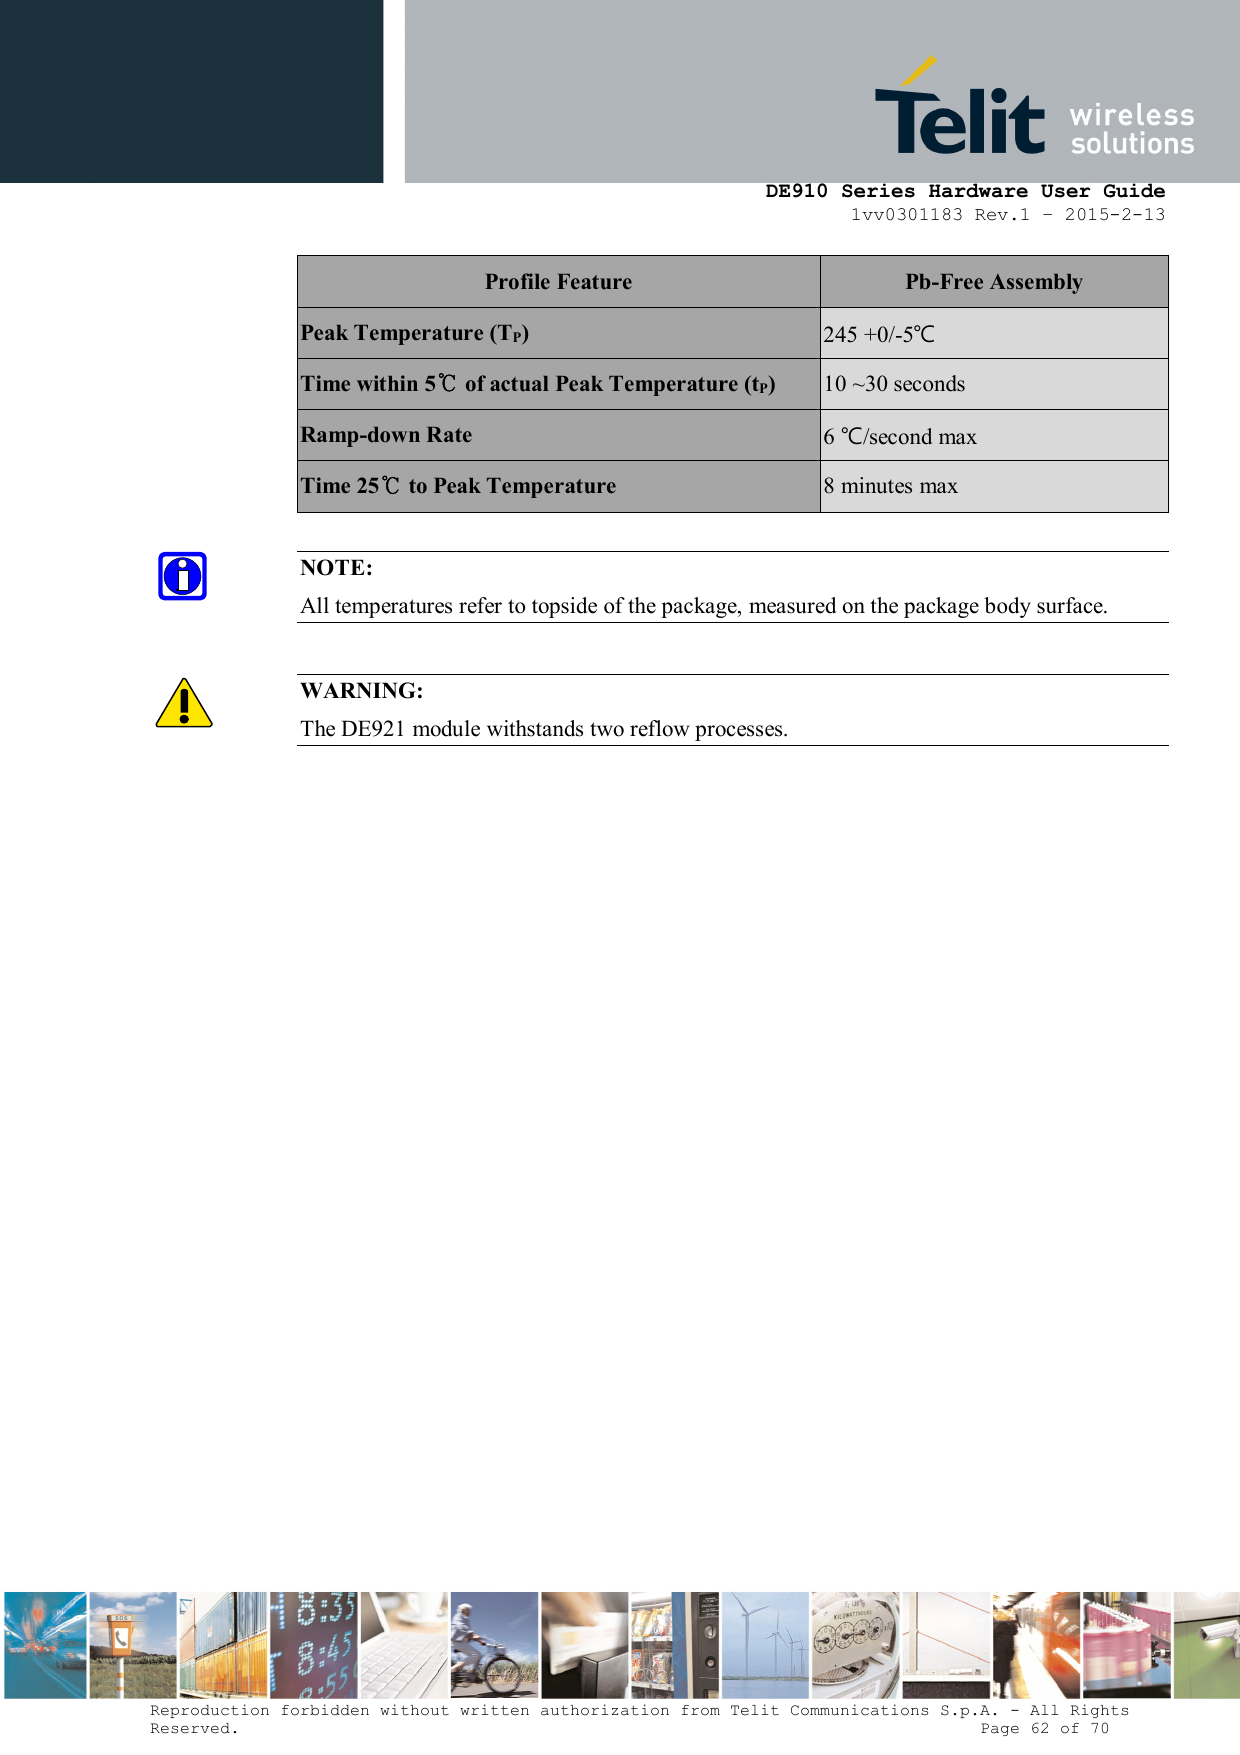      DE910 Series Hardware User Guide 1vv0301183 Rev.1 – 2015-2-13 Reproduction forbidden without written authorization from Telit Communications S.p.A. - All Rights Reserved.                                                                          Page 62 of 70 Profile Feature  Pb-Free Assembly Peak Temperature (TP)  245 +0/-5℃ Time within 5℃ of actual Peak Temperature (tP)  10 ~30 seconds Ramp-down Rate  6 ℃/second max Time 25℃ to Peak Temperature  8 minutes max  NOTE: All temperatures refer to topside of the package, measured on the package body surface.  WARNING: The DE921 module withstands two reflow processes.        